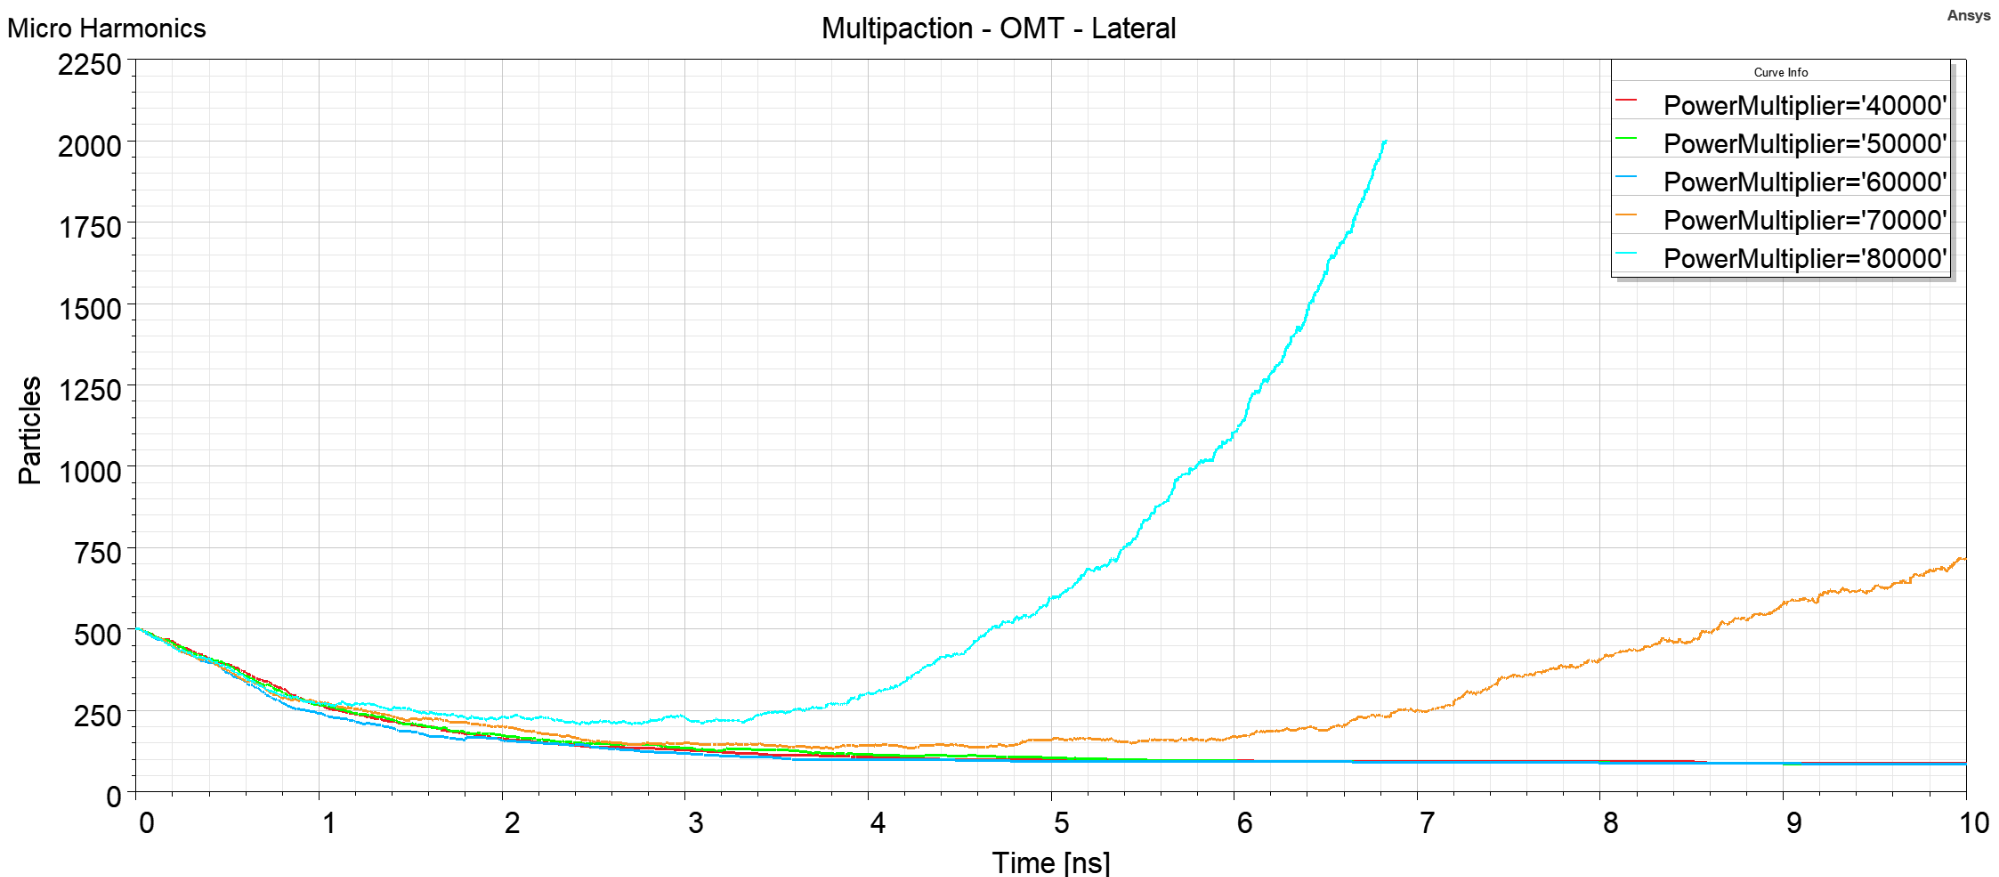 multipaction simulation where both orthogonal modes on the common mode port are excited